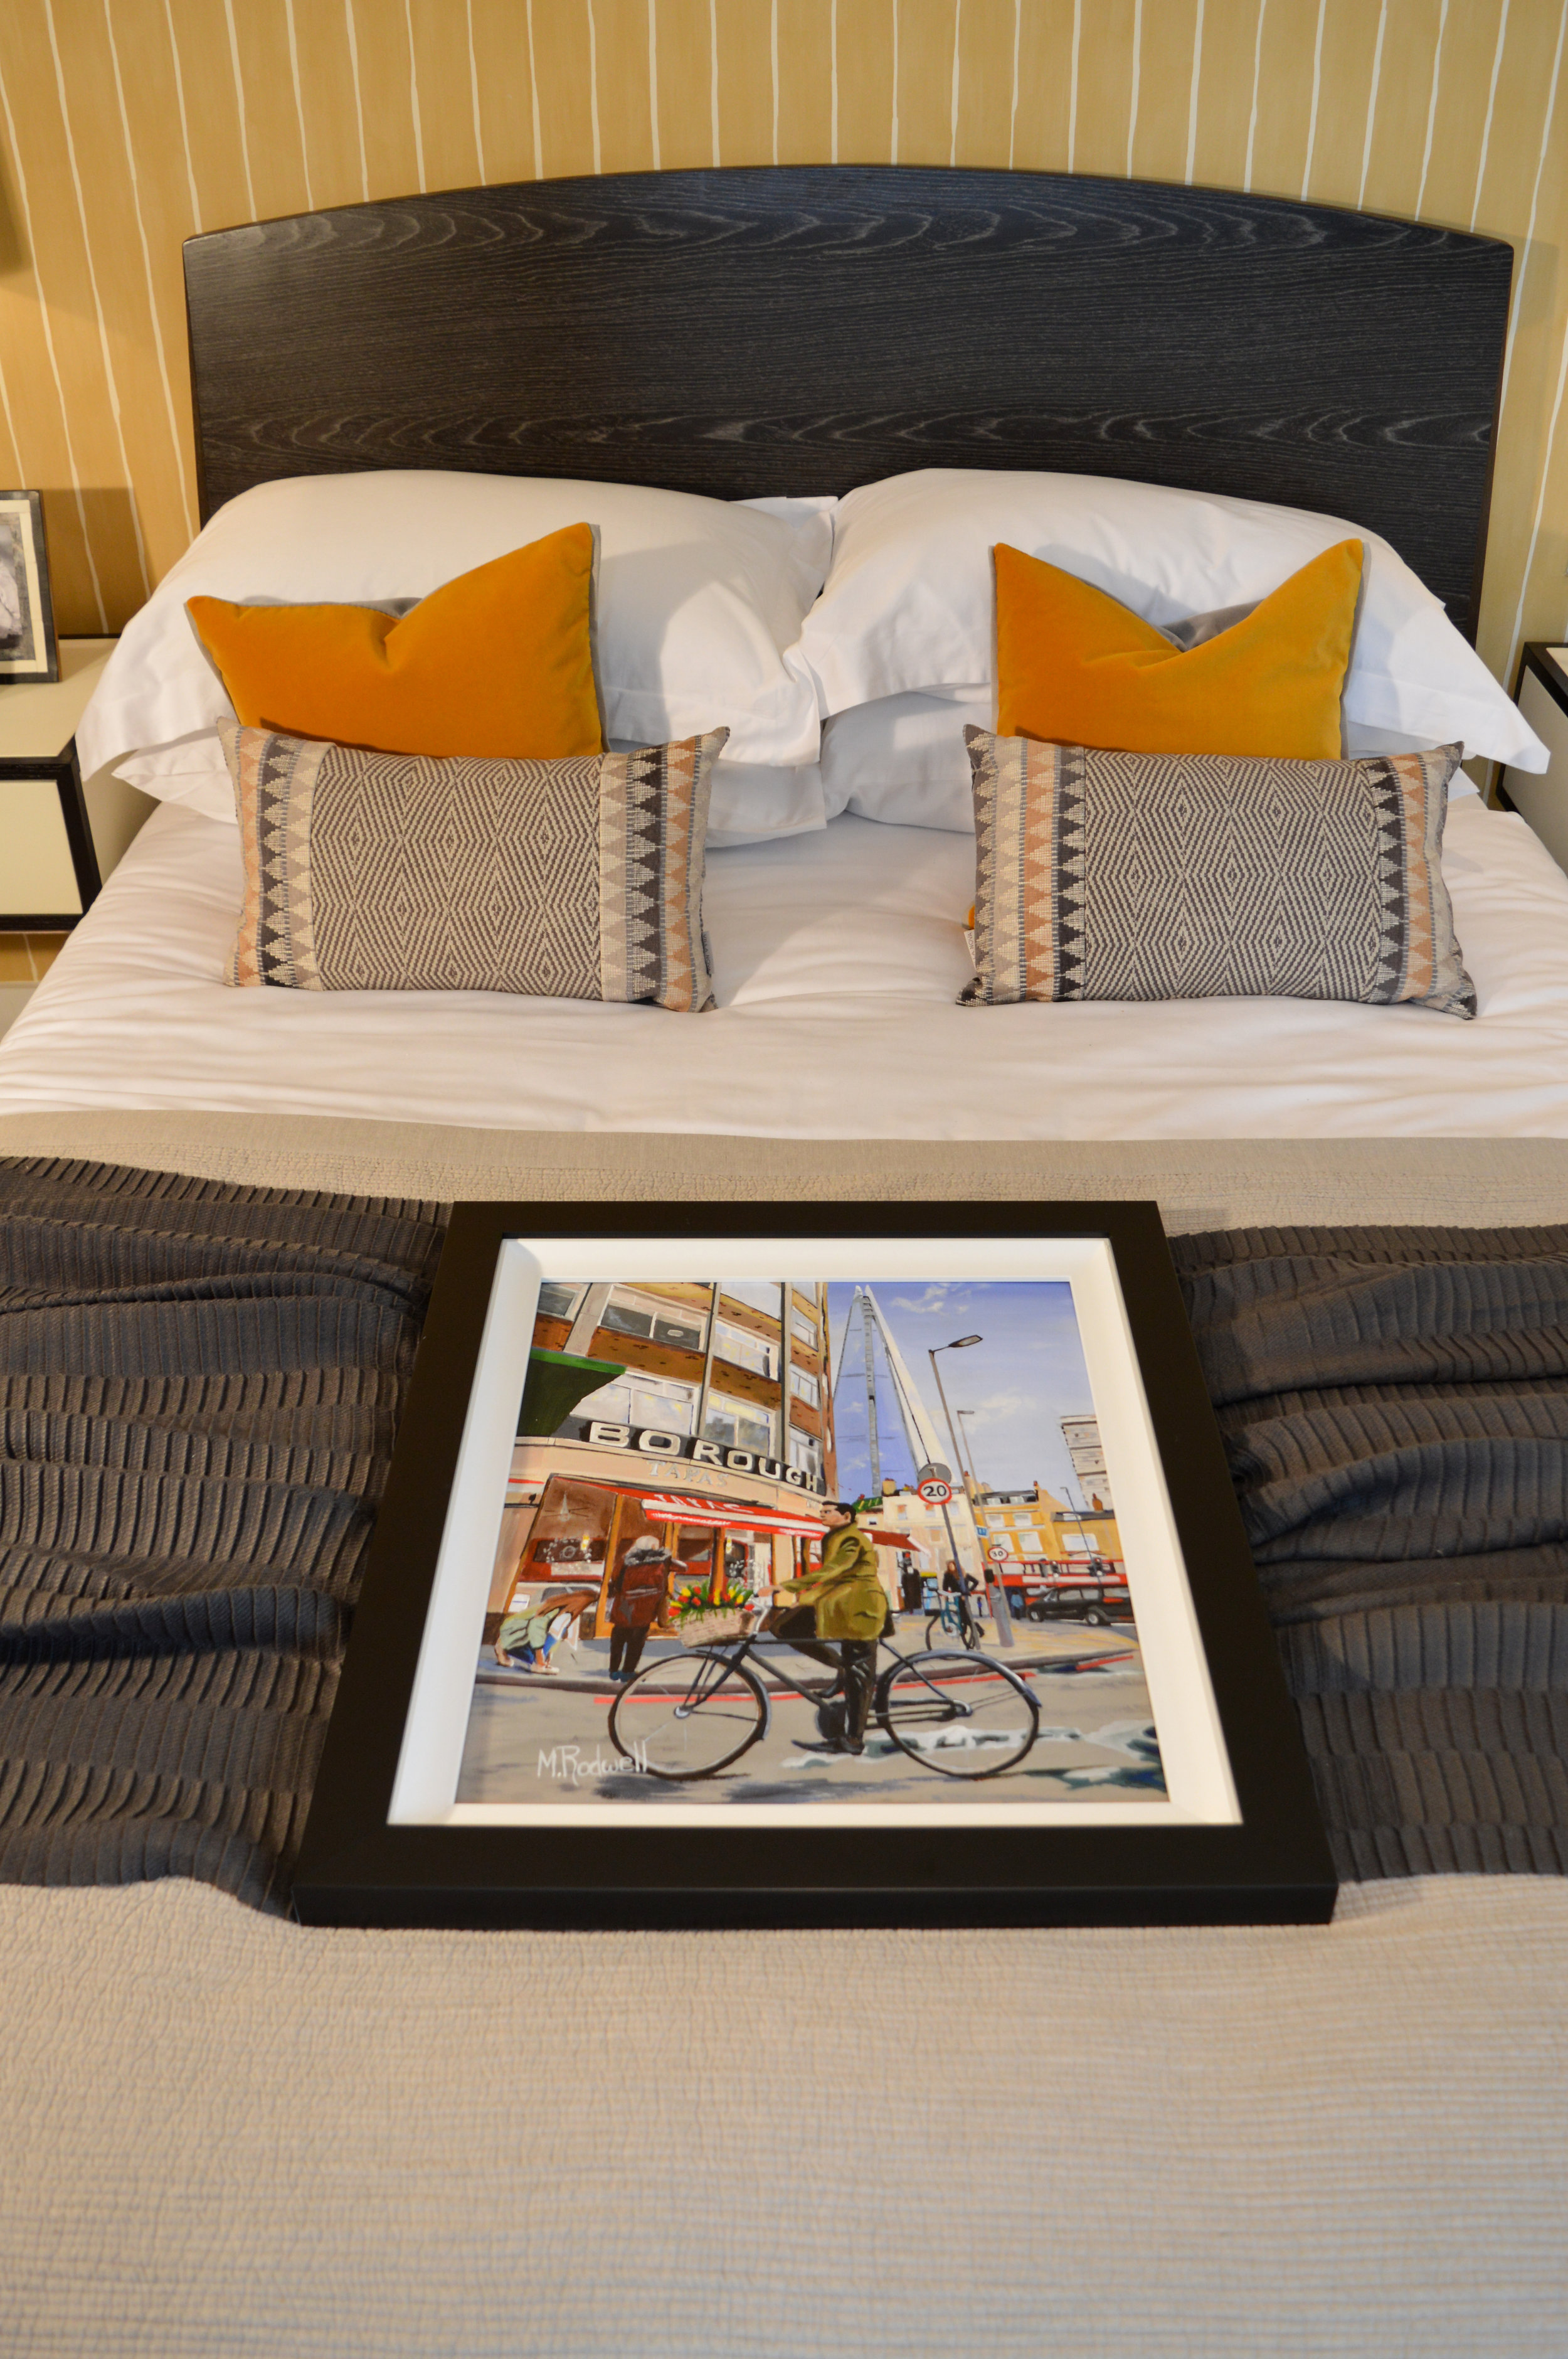 Borough Print on a Bed